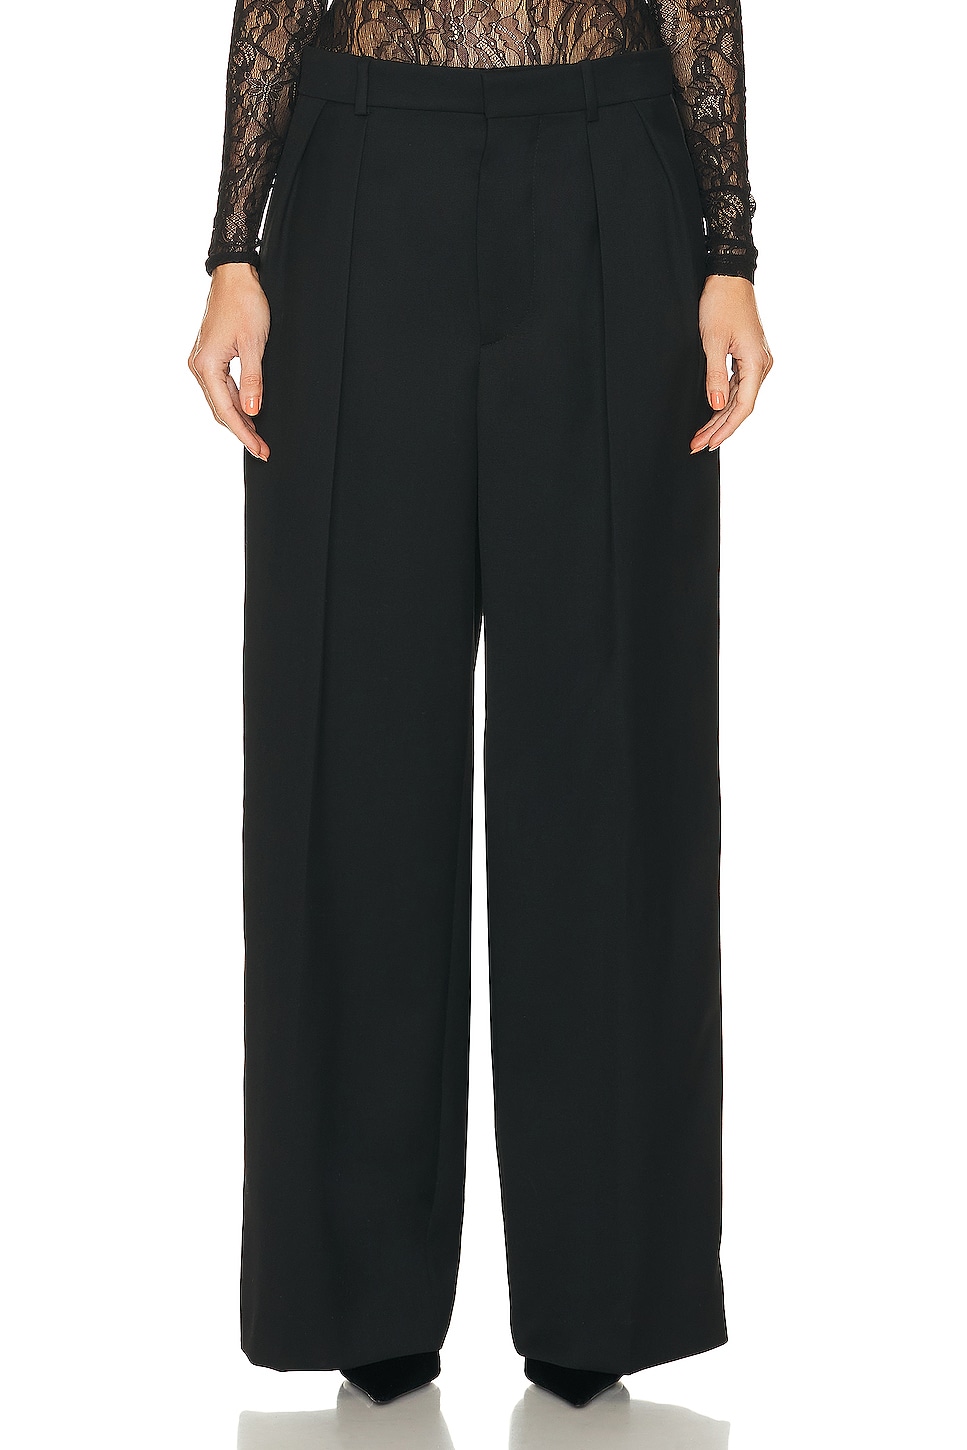 Image 1 of WARDROBE.NYC Low Rise Tuxedo Trouser in Black